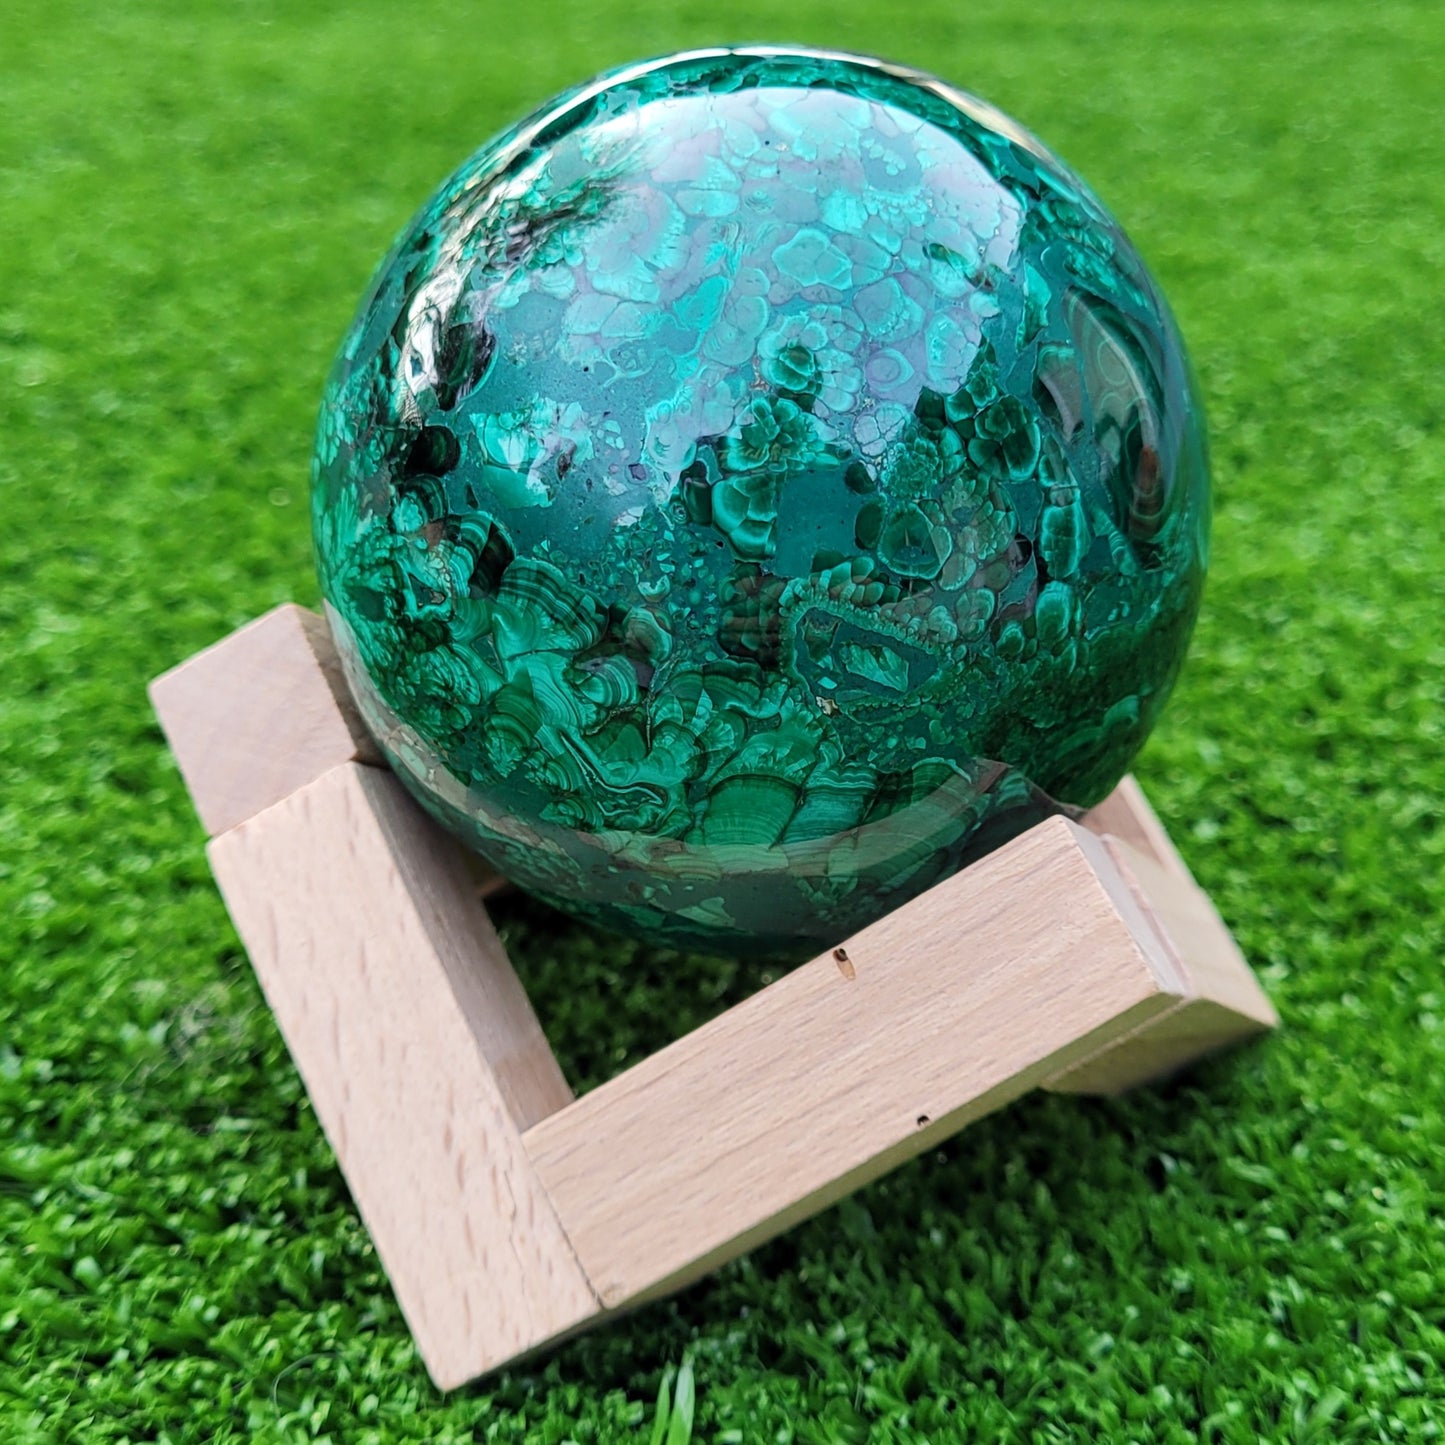 Wood V-Shaped Sphere Display Stands to Choose From for Spheres 2.3" to 8" (58mm to 178mm)